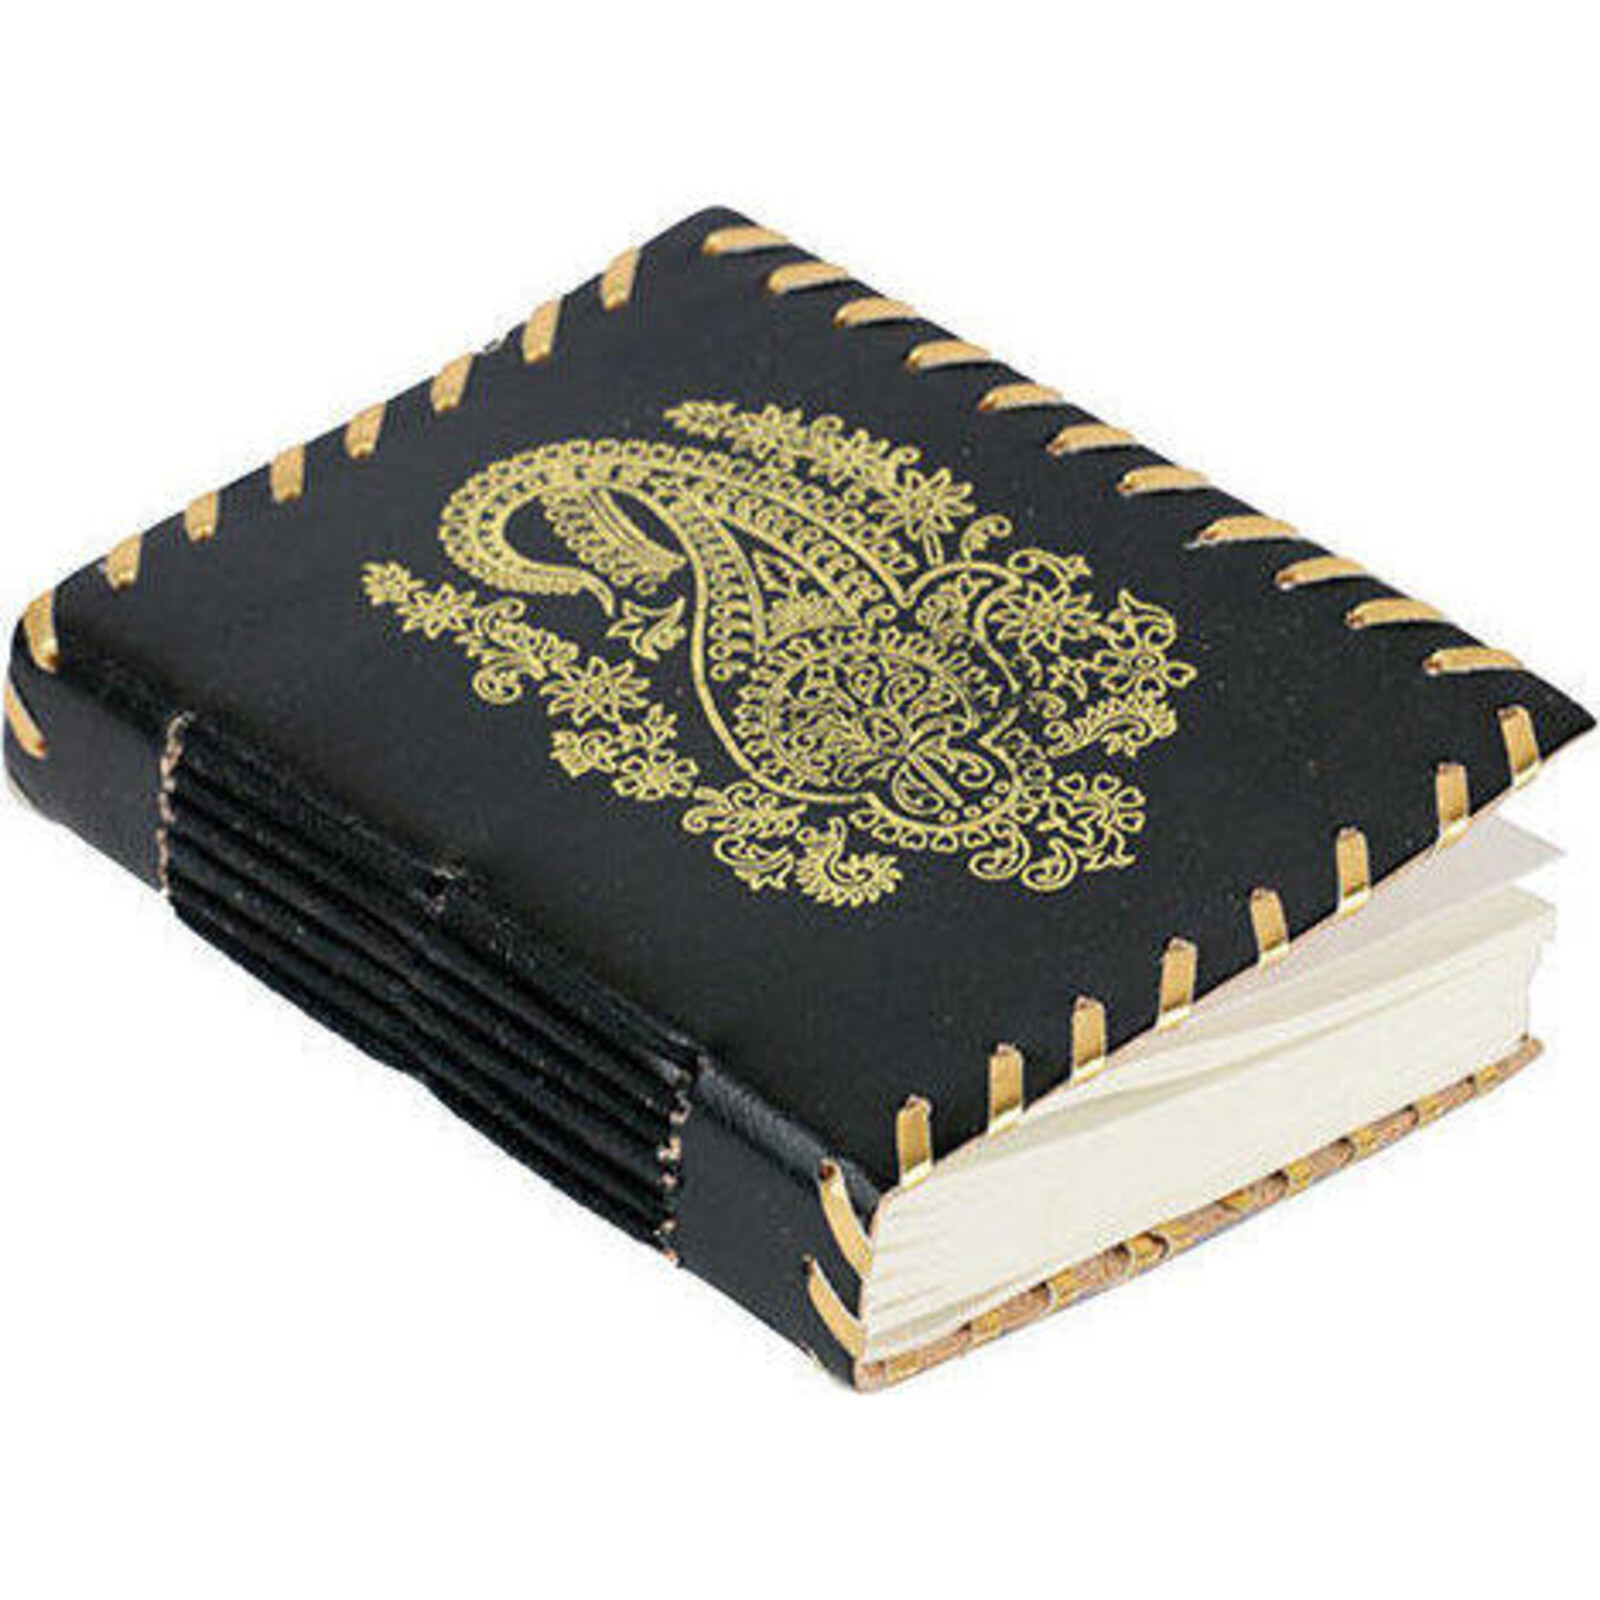 Leather Notebook Paisley Print Black